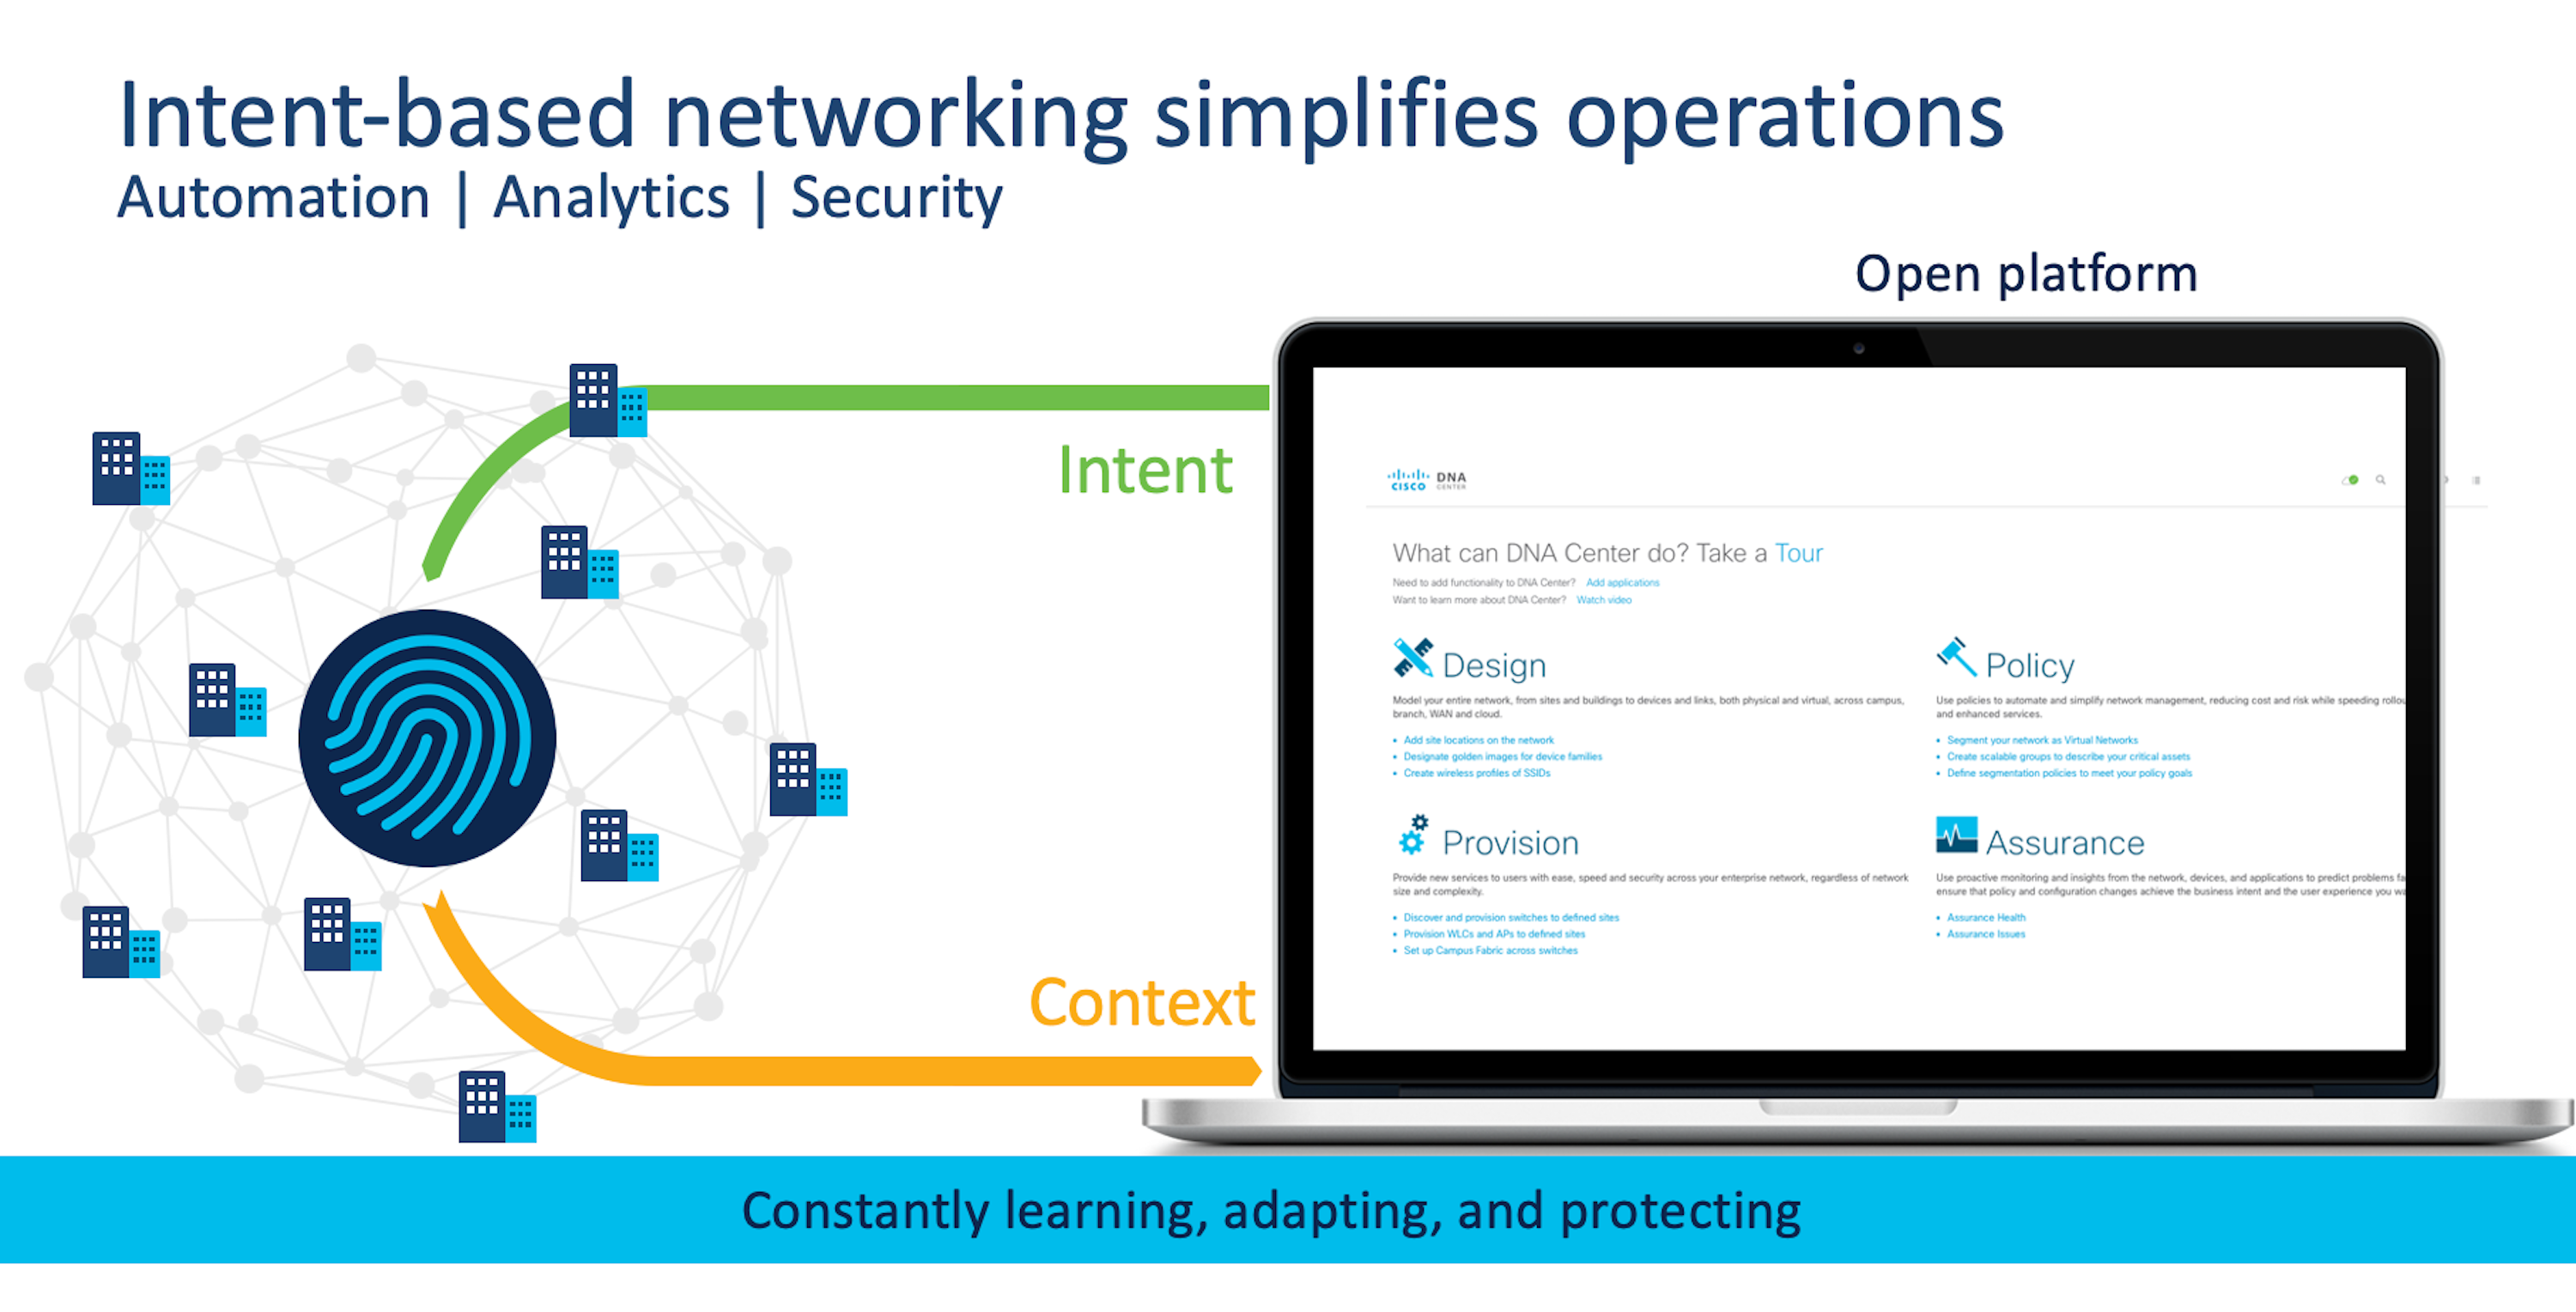 Customers want Network Operations Simplification TeamJiX